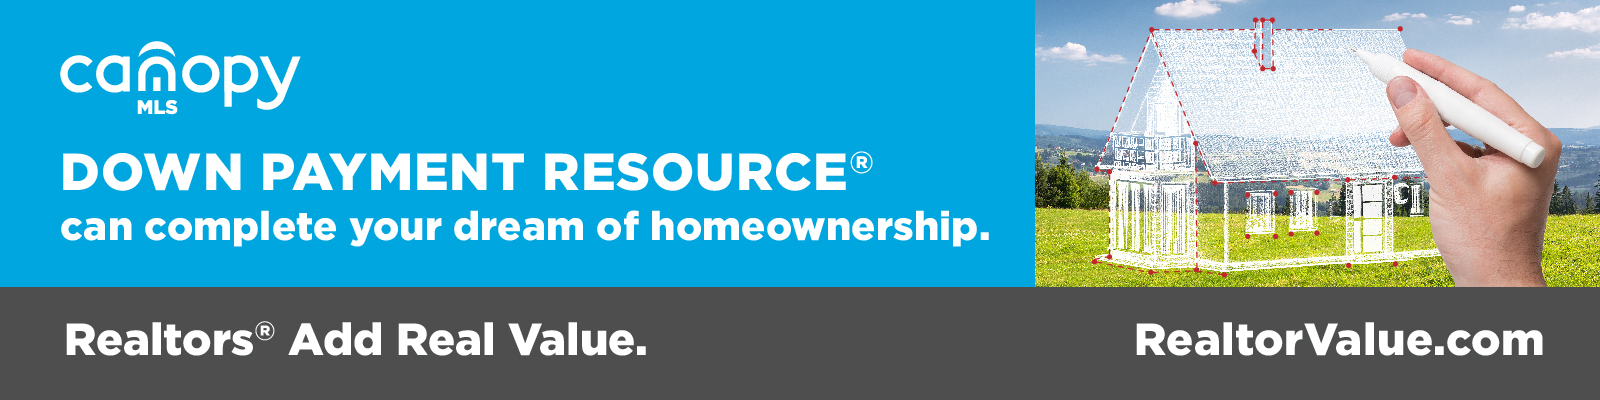 Down Payment Resource can complete your dream of homeownership.